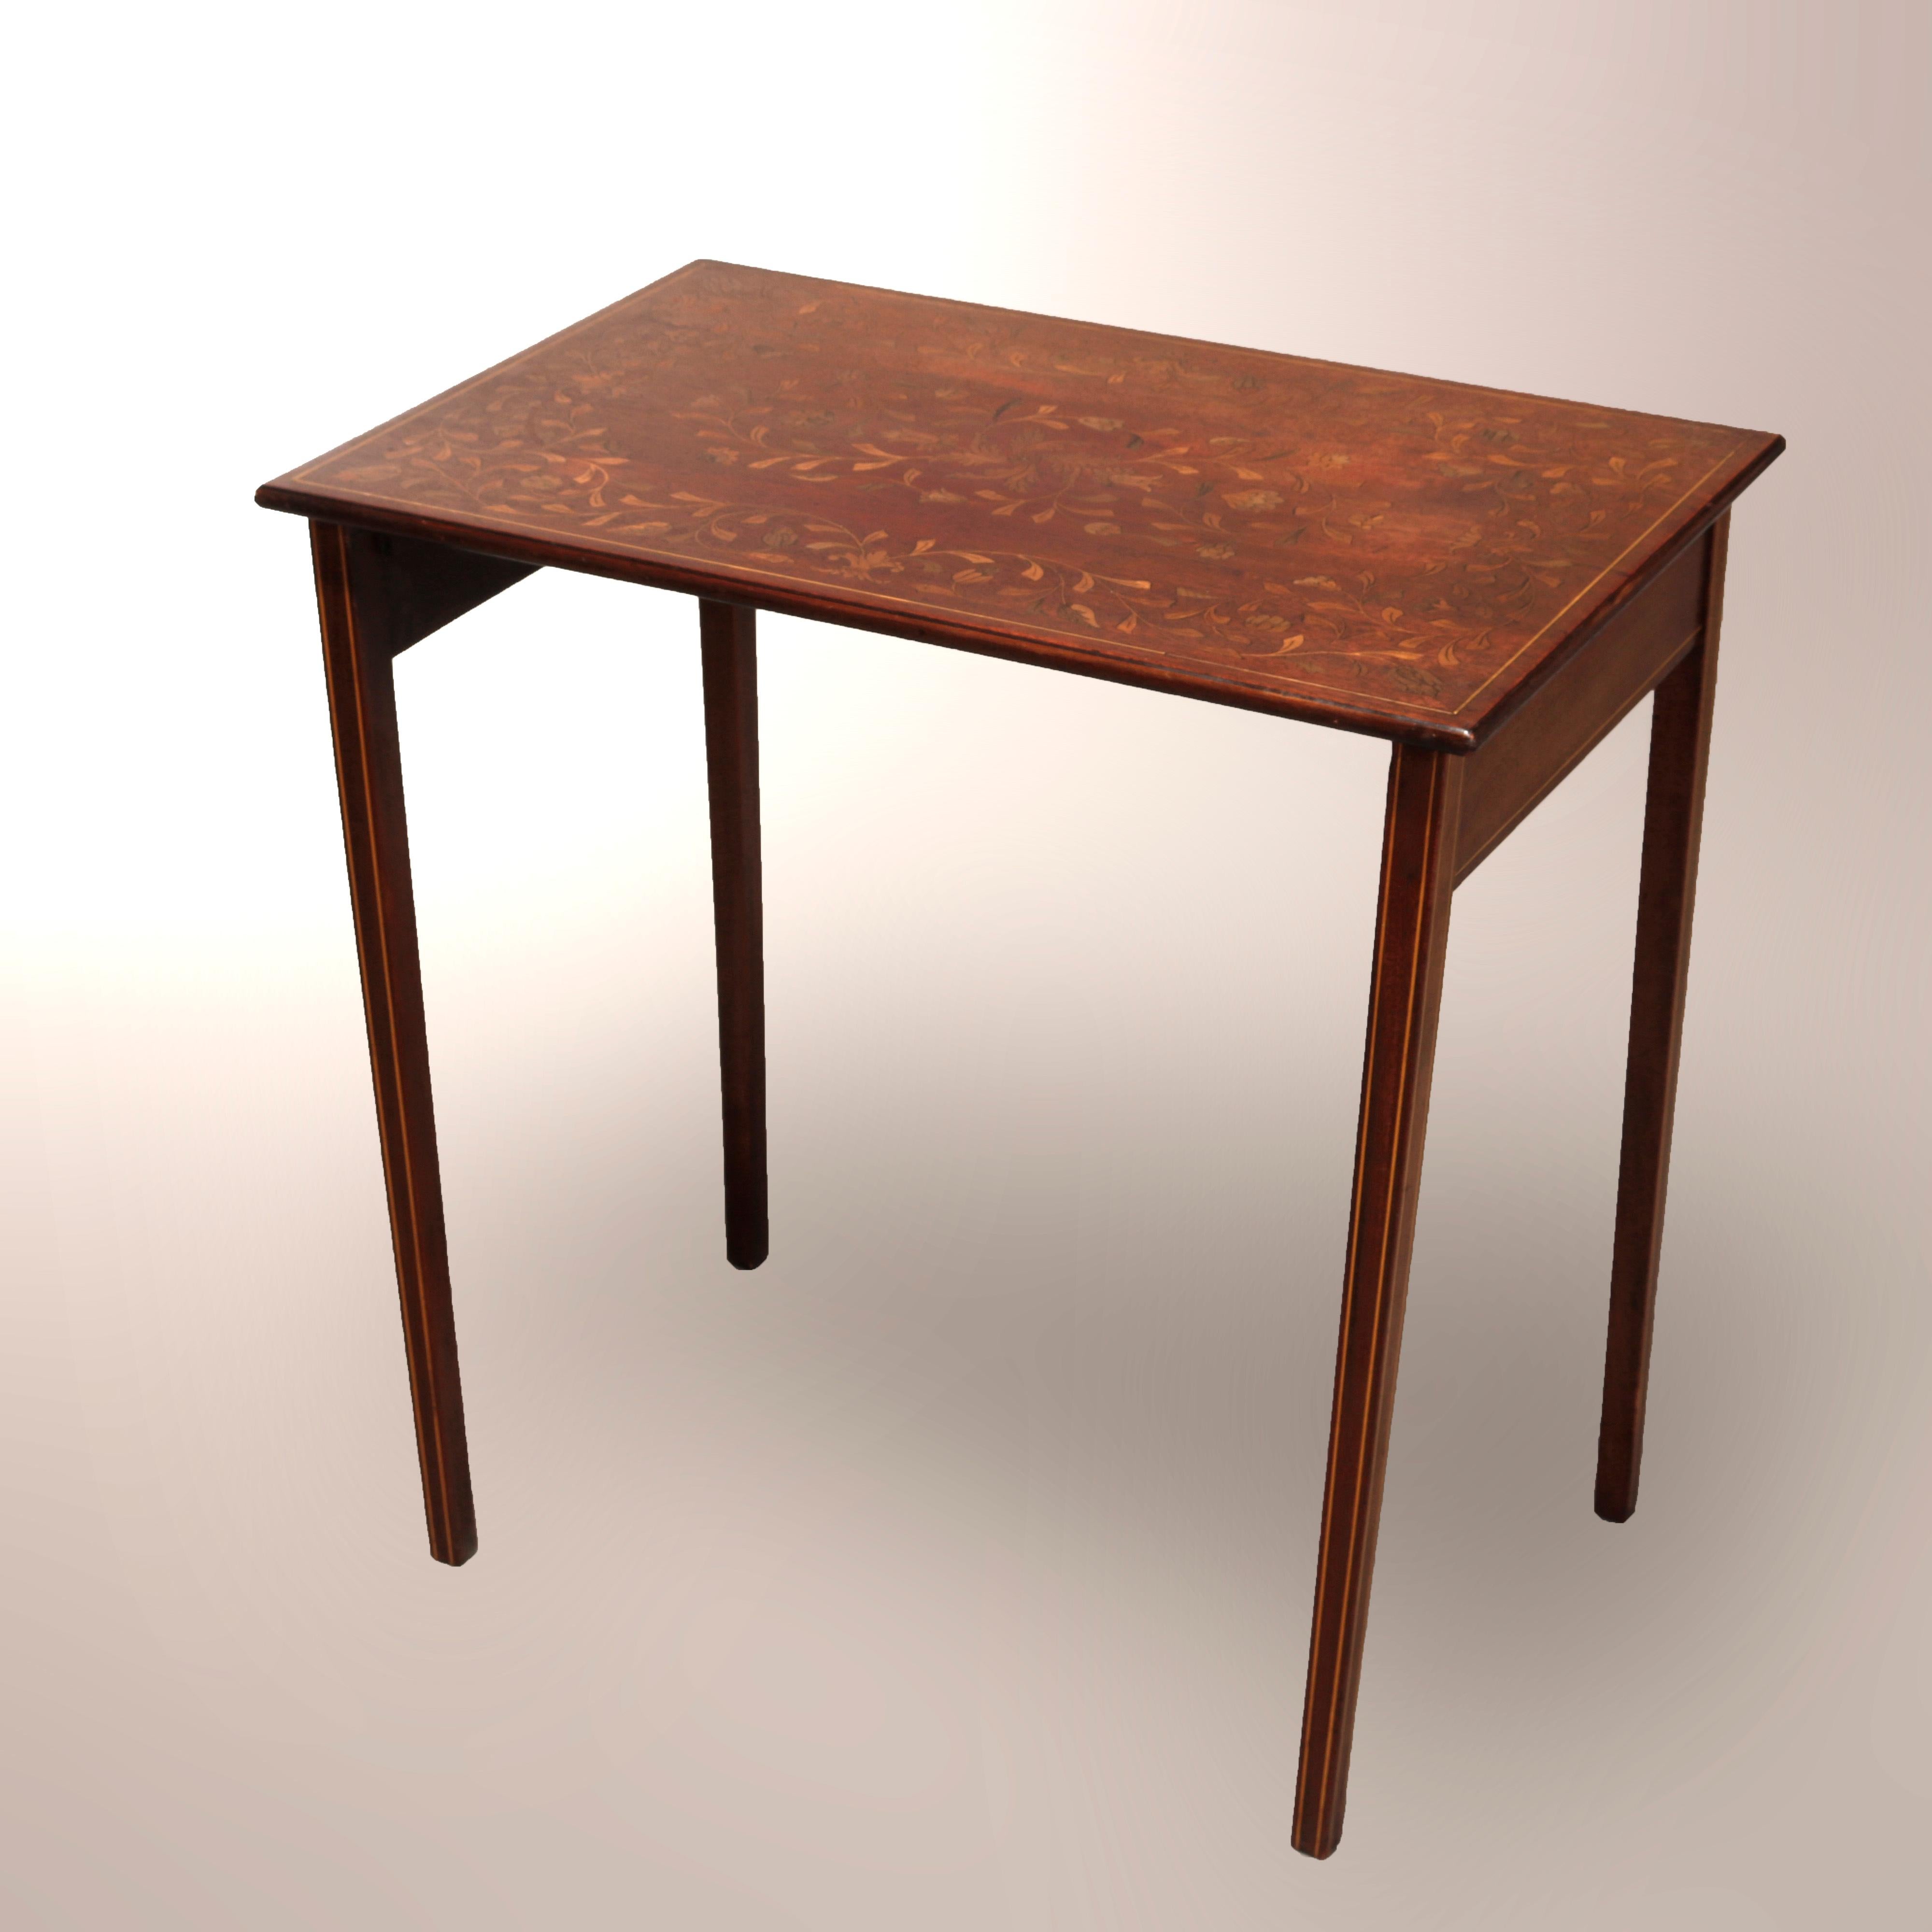 20th Century Antique R.J. Horner Mahogany Marquetry Satinwood Inlay Nesting Tables circa 1910